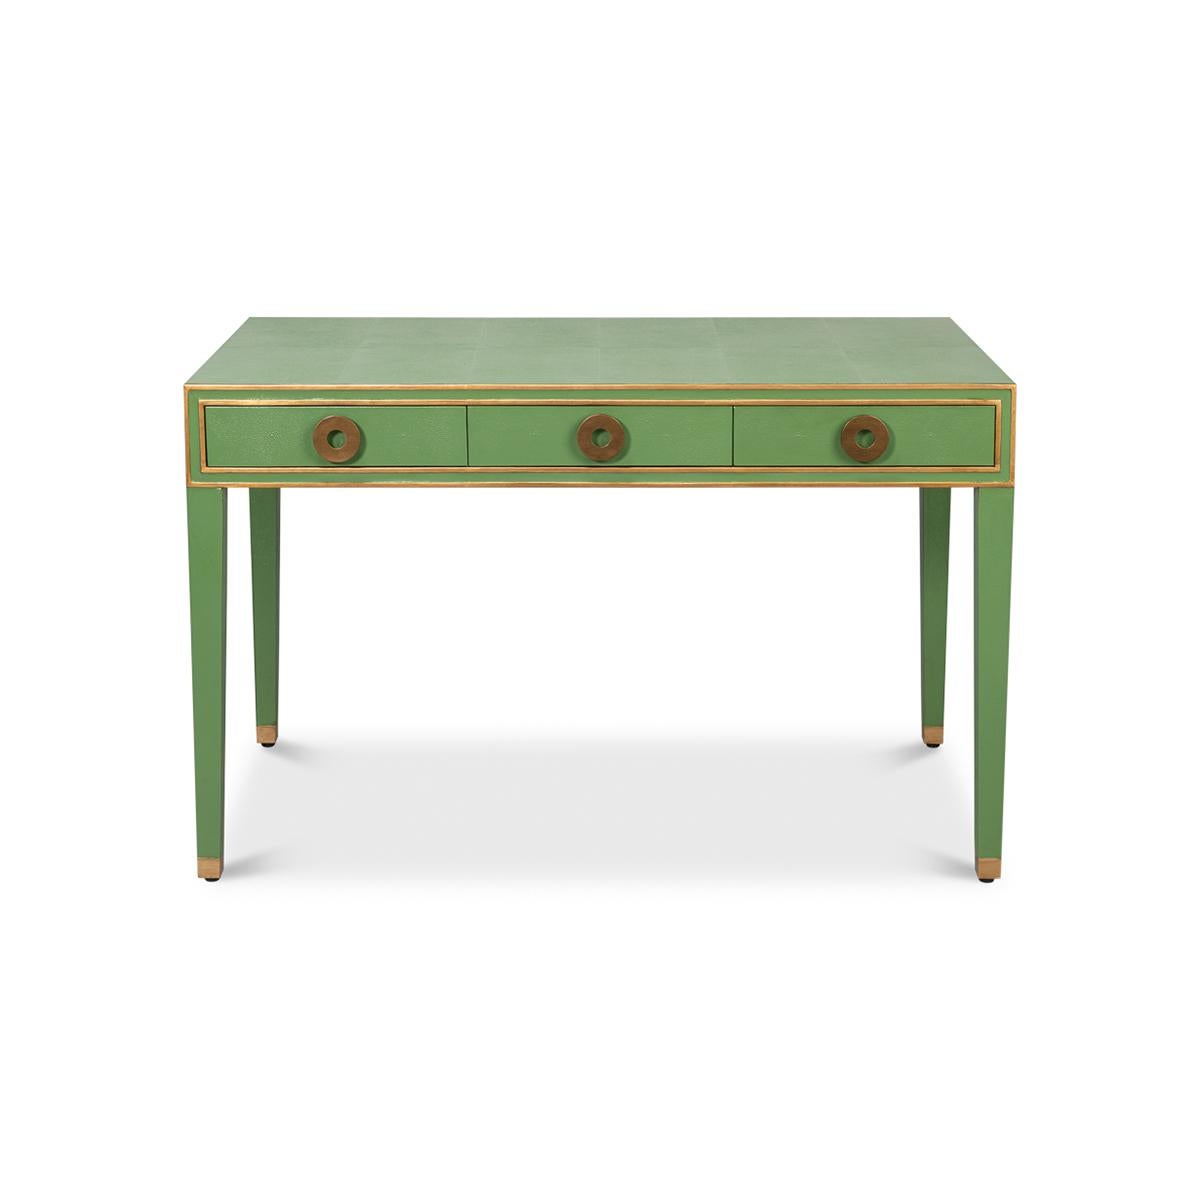 A French Art Deco style shagreen embossed leather desk in a bright green. With gilded highlight trim, three frieze drawers with modern round pulls, and raised on square tapered legs.

Dimensions: 48